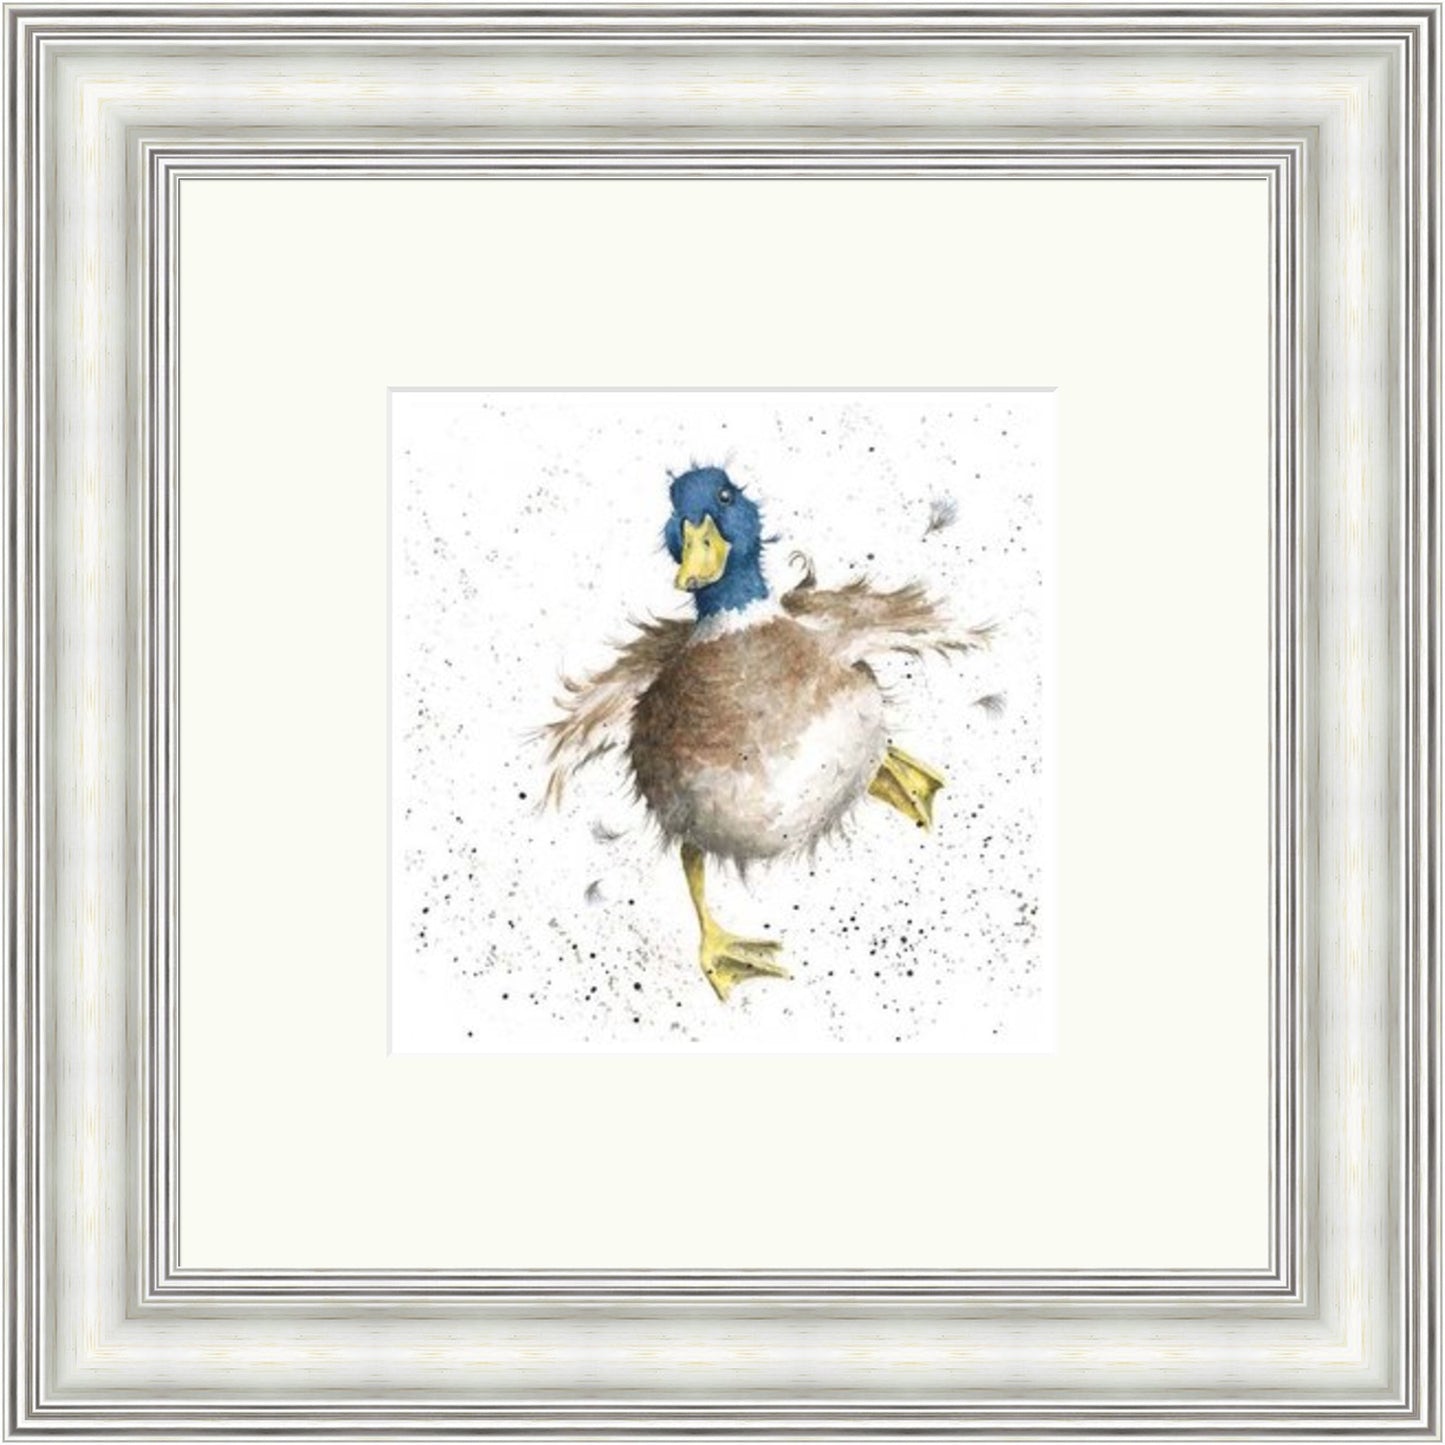 A Waddle And A Quack  -  Wrendale Designs by Hannah Dale